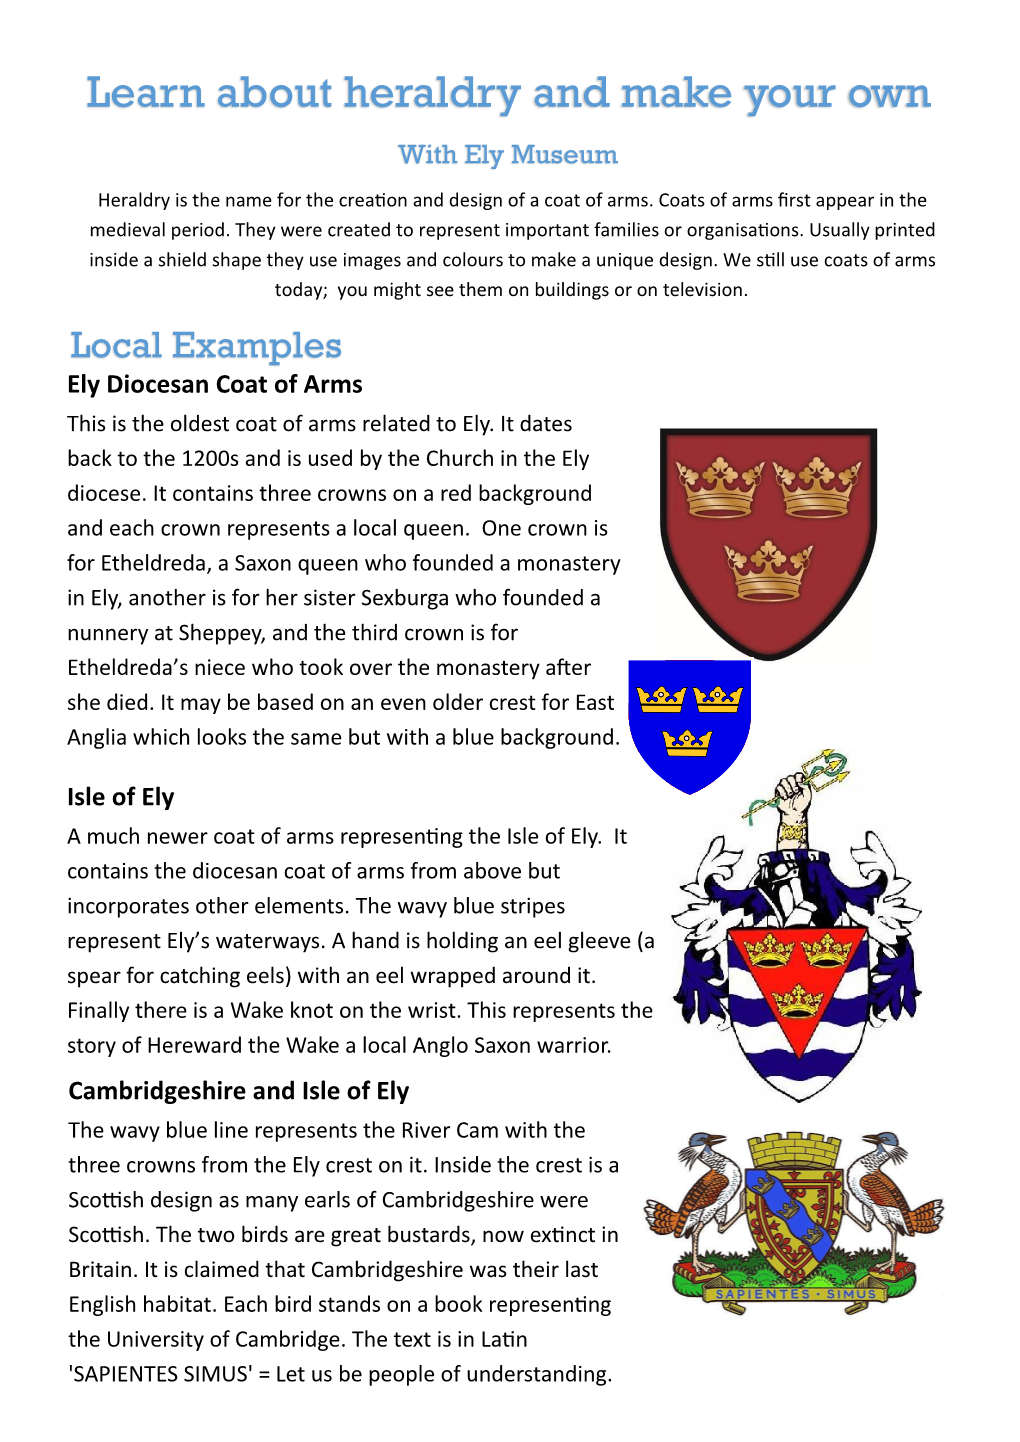 Learn About Heraldry and Make Your Own